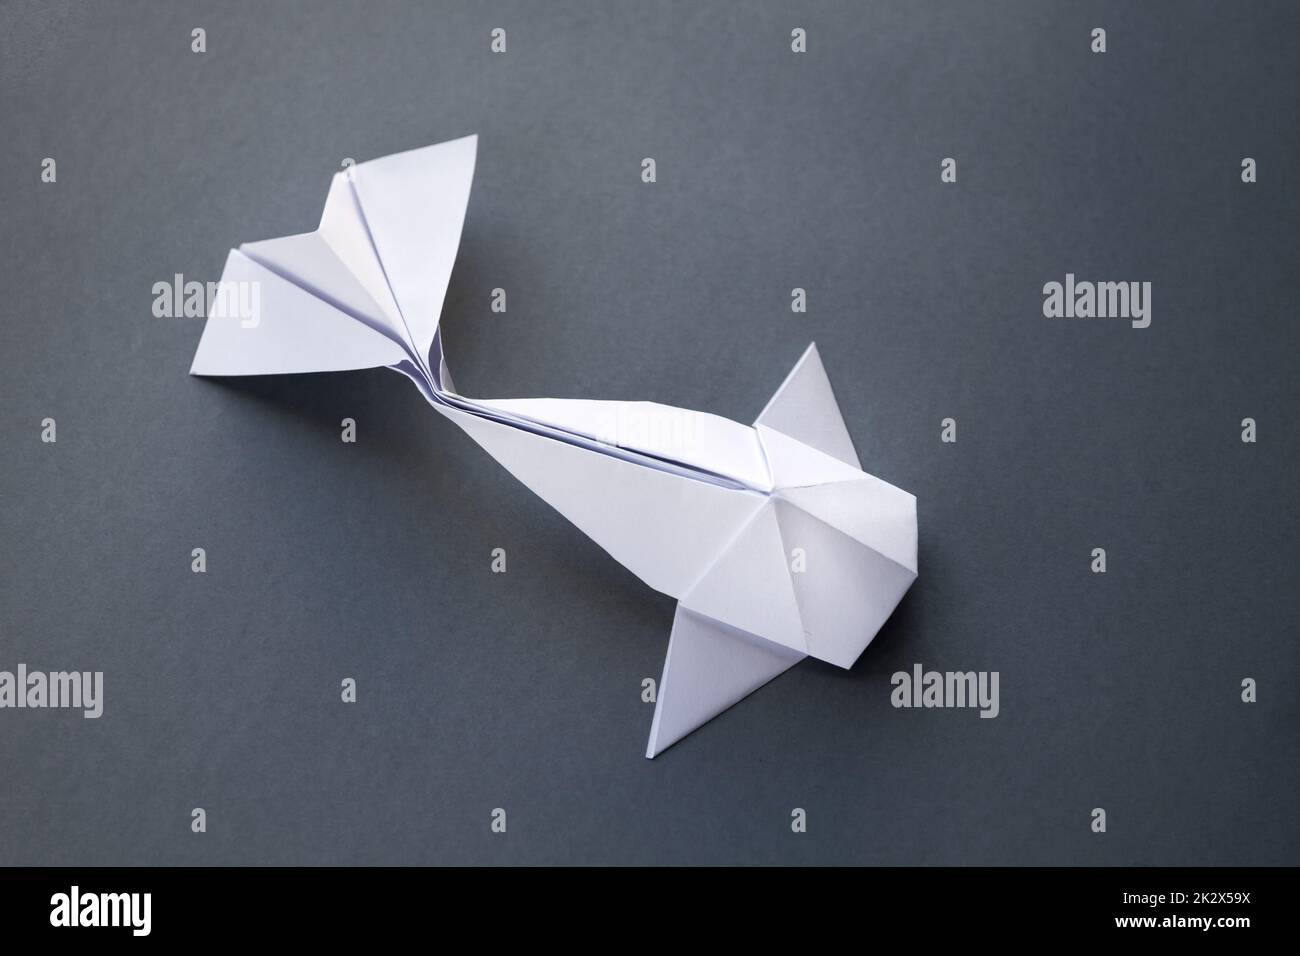 White paper fish origami isolated on a grey background Stock Photo